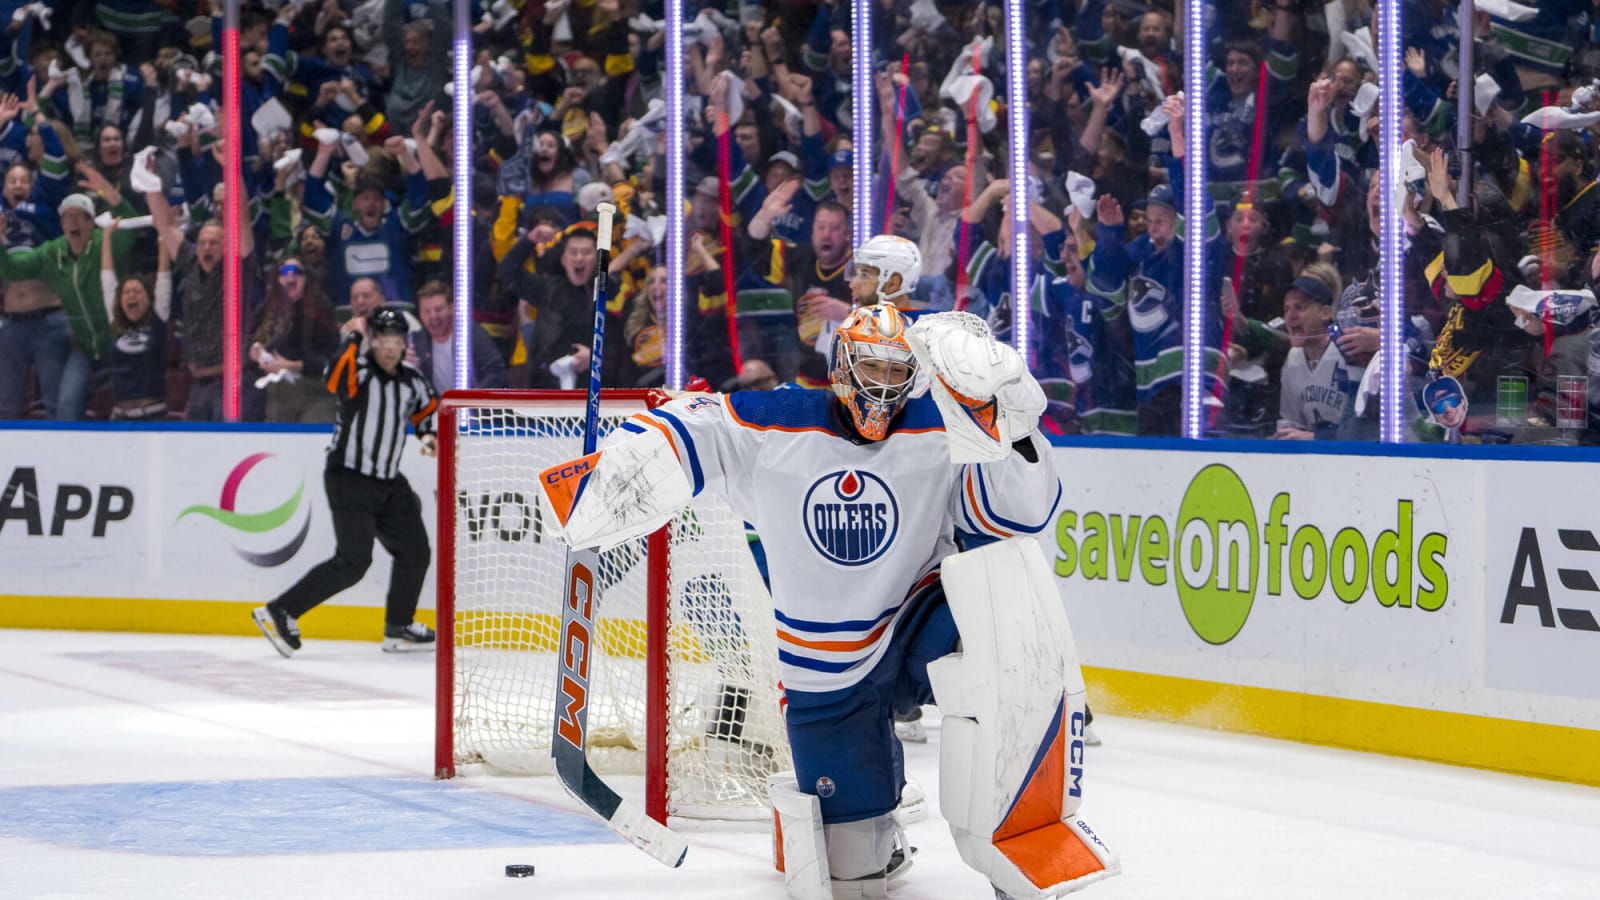 Oilers starting Stuart Skinner in game six vs. Canucks is a bold move with minimal upside